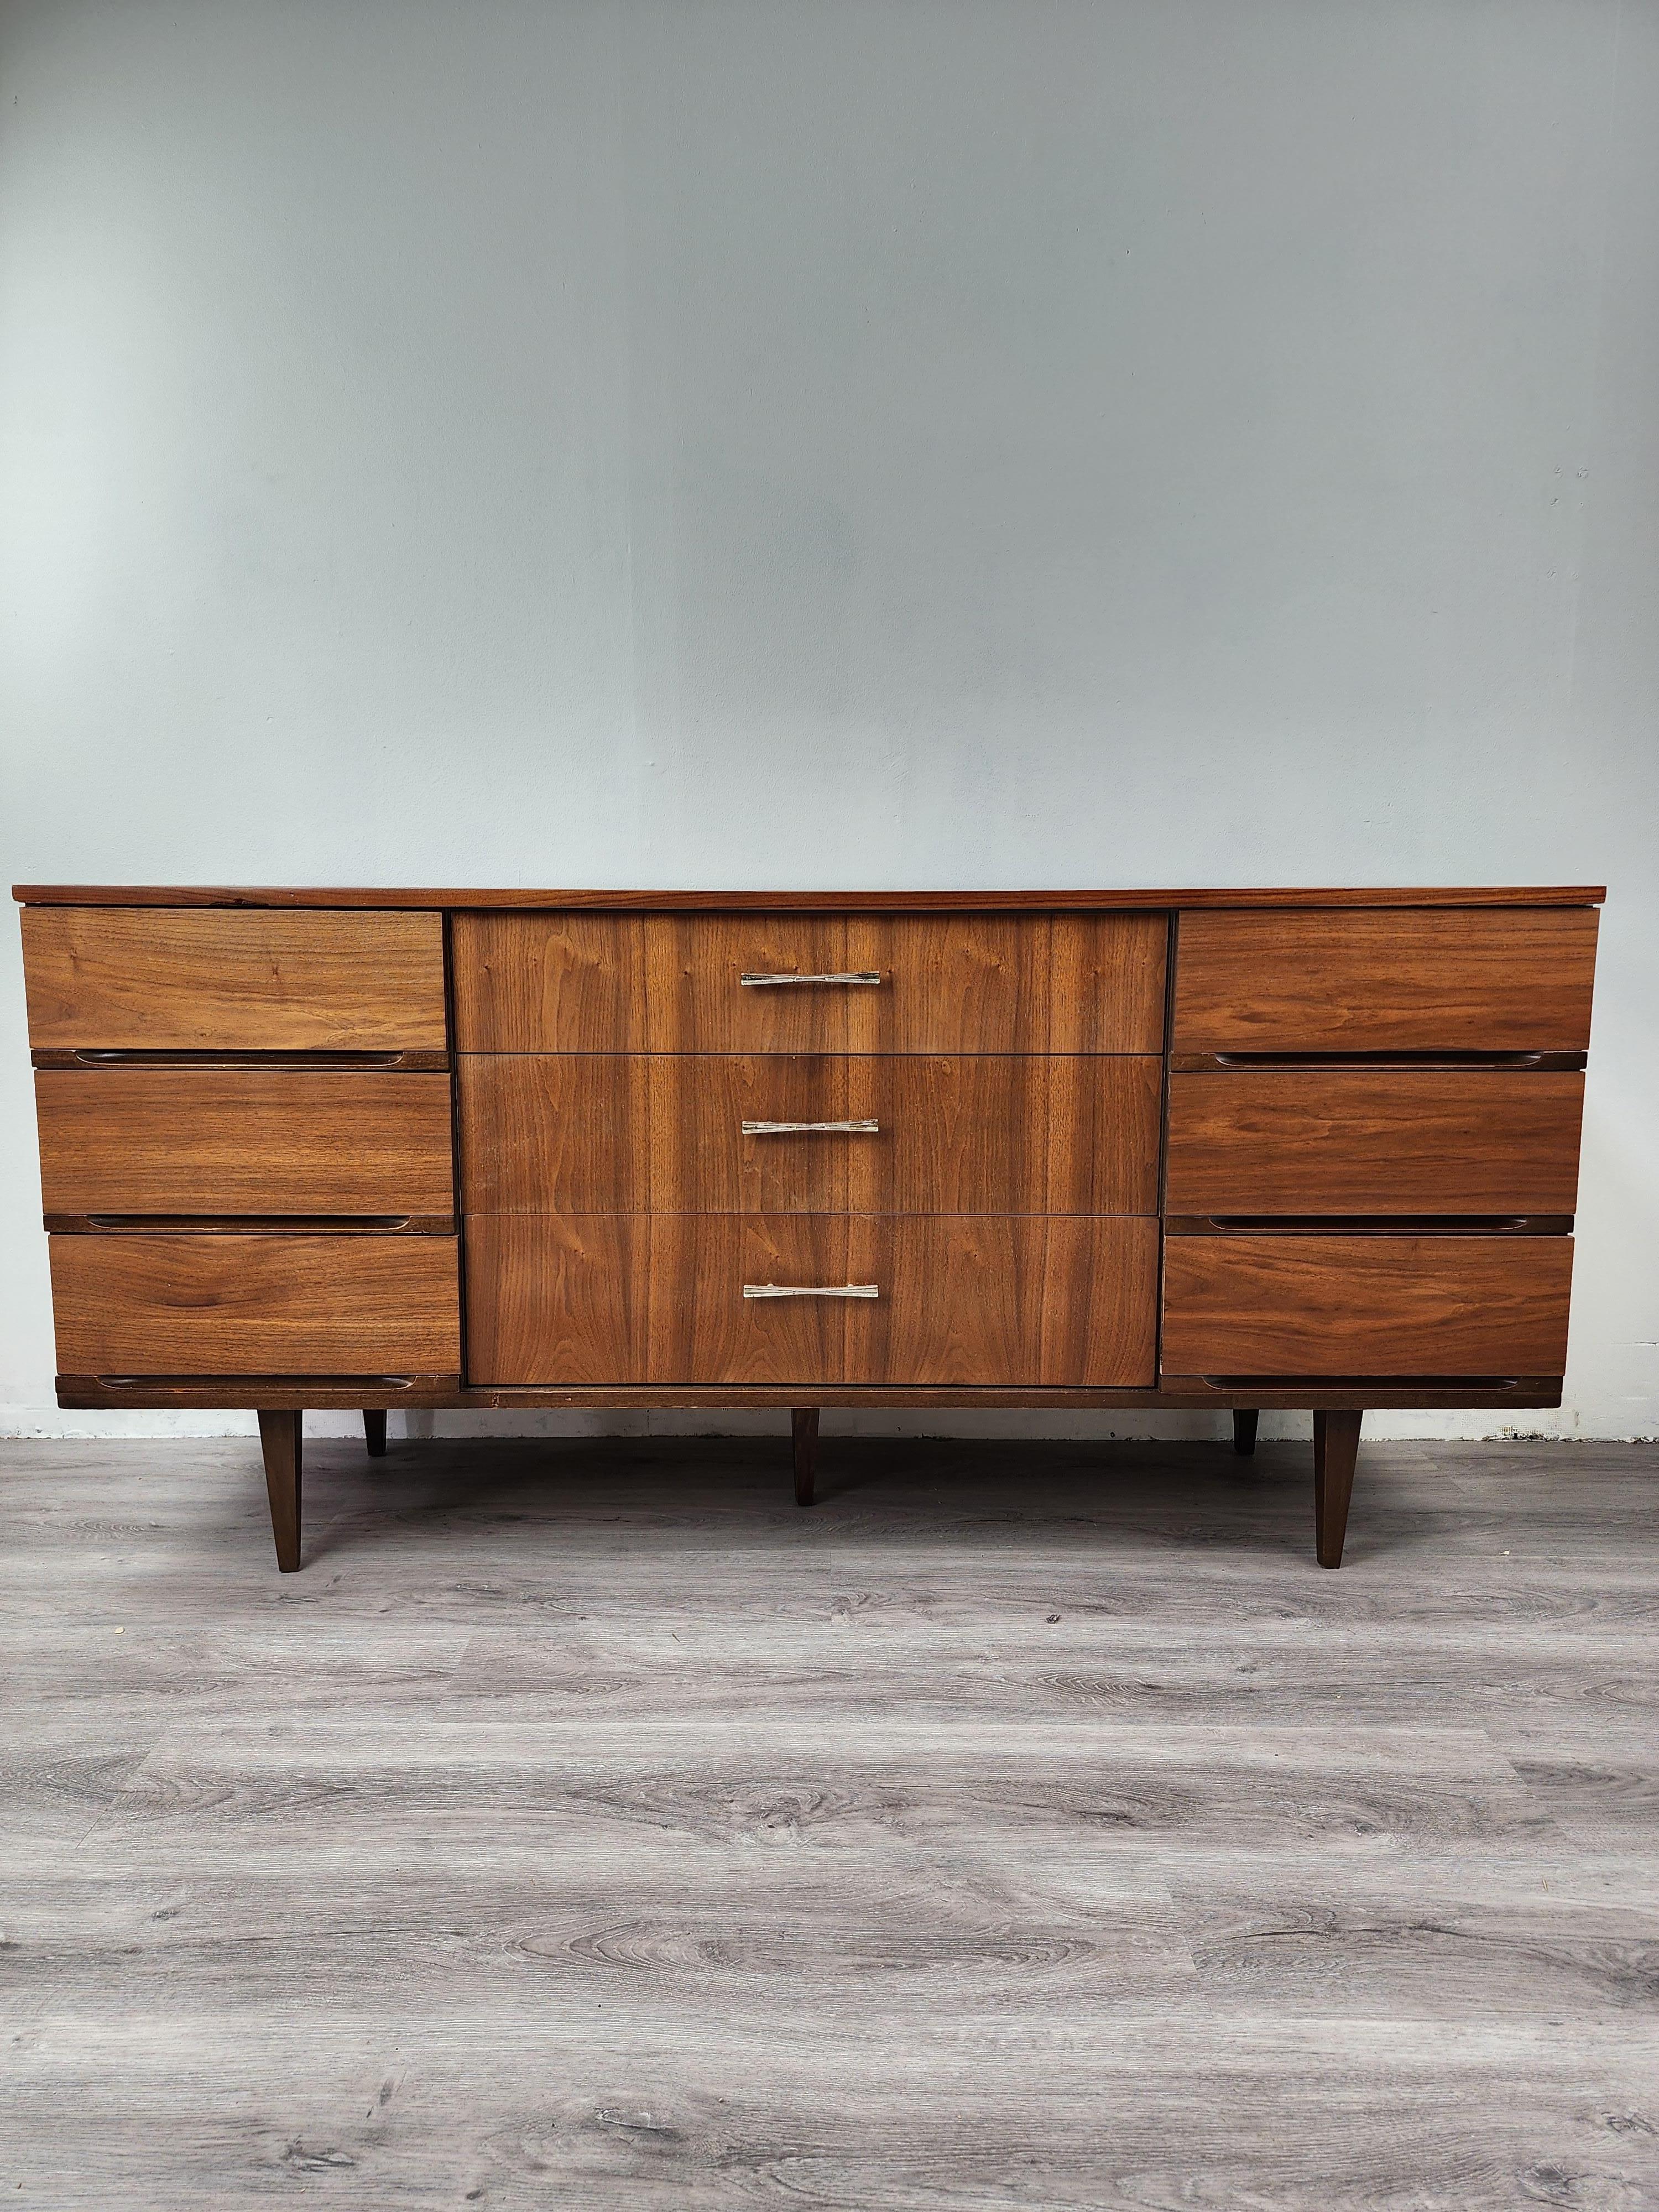 This lovely walnut dresser was created by Harmony House in the 1960s. It was purchased from the family of the original owner and was professionally restored and refinished, along with the matching tall chest. The grain of the 60 year old walnut is